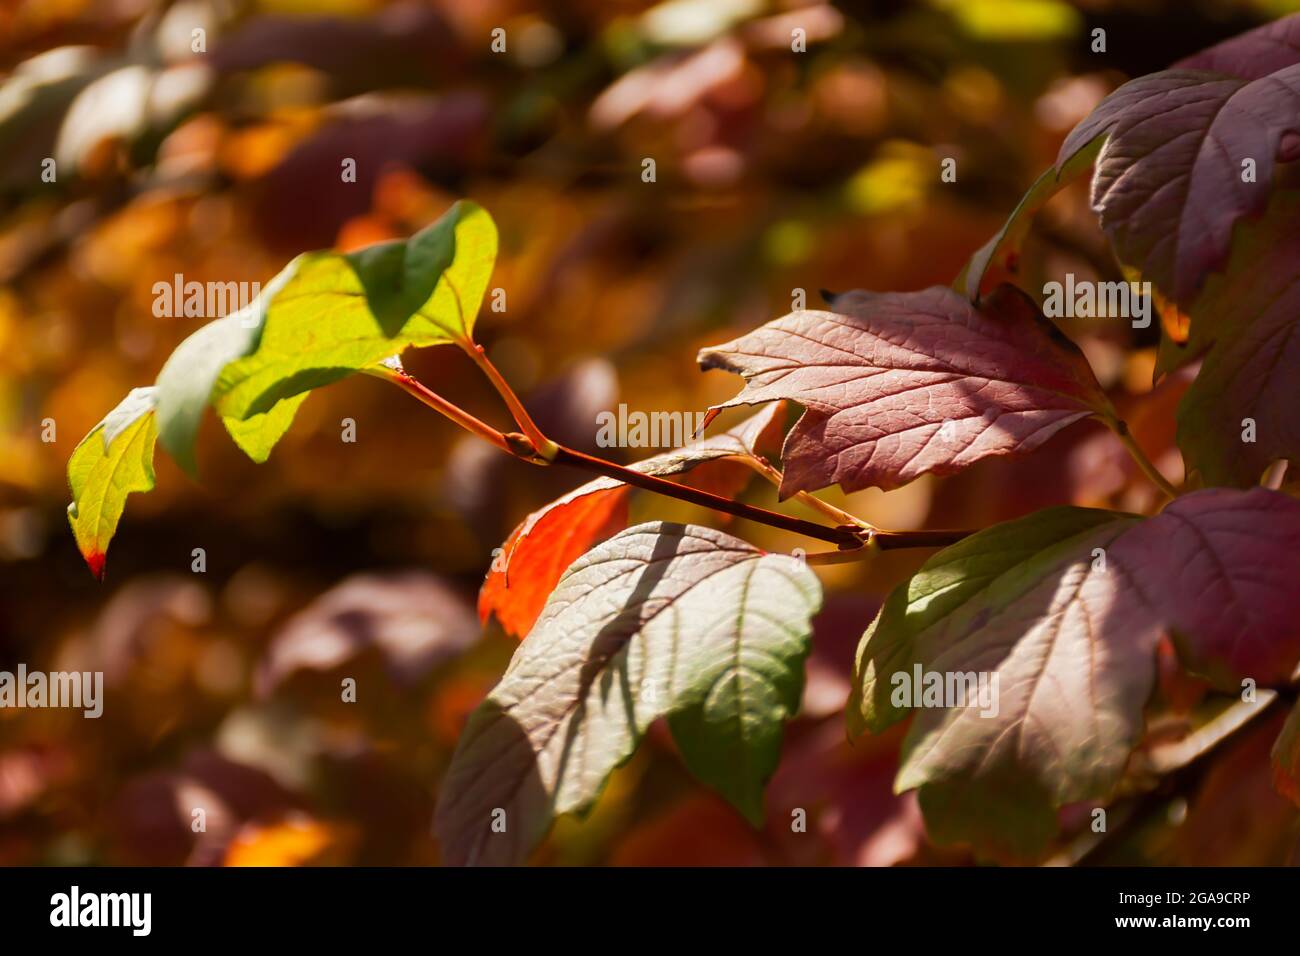 Autumn red brown leaves in soft focus on a blurry background. A full frame of colorful red-orange leaves. Warm sunlight. The background is a natural p Stock Photo